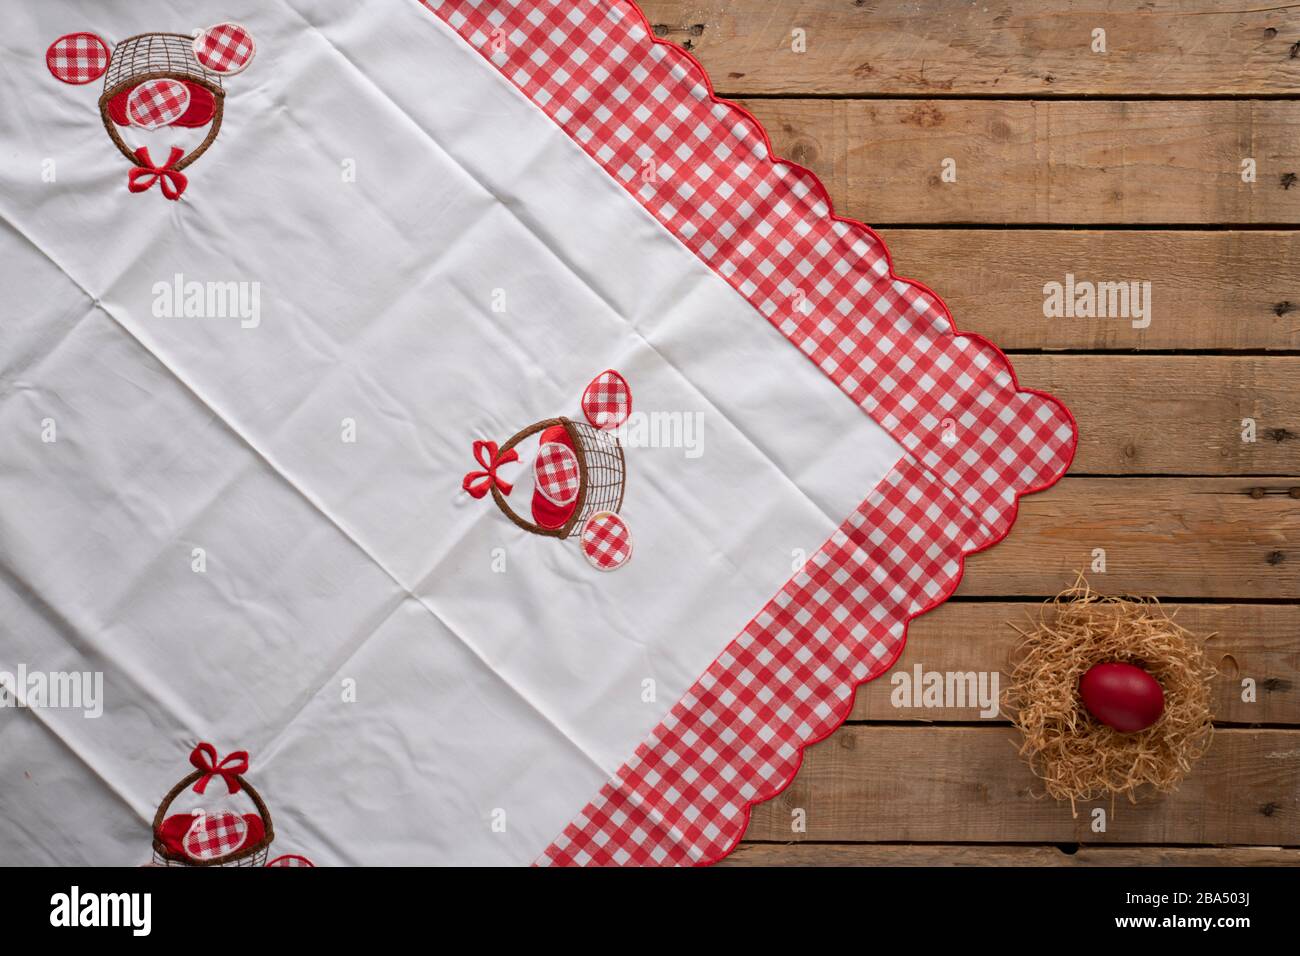 Easter tablecloth on a wooden surface with a nest and a red painted egg Stock Photo